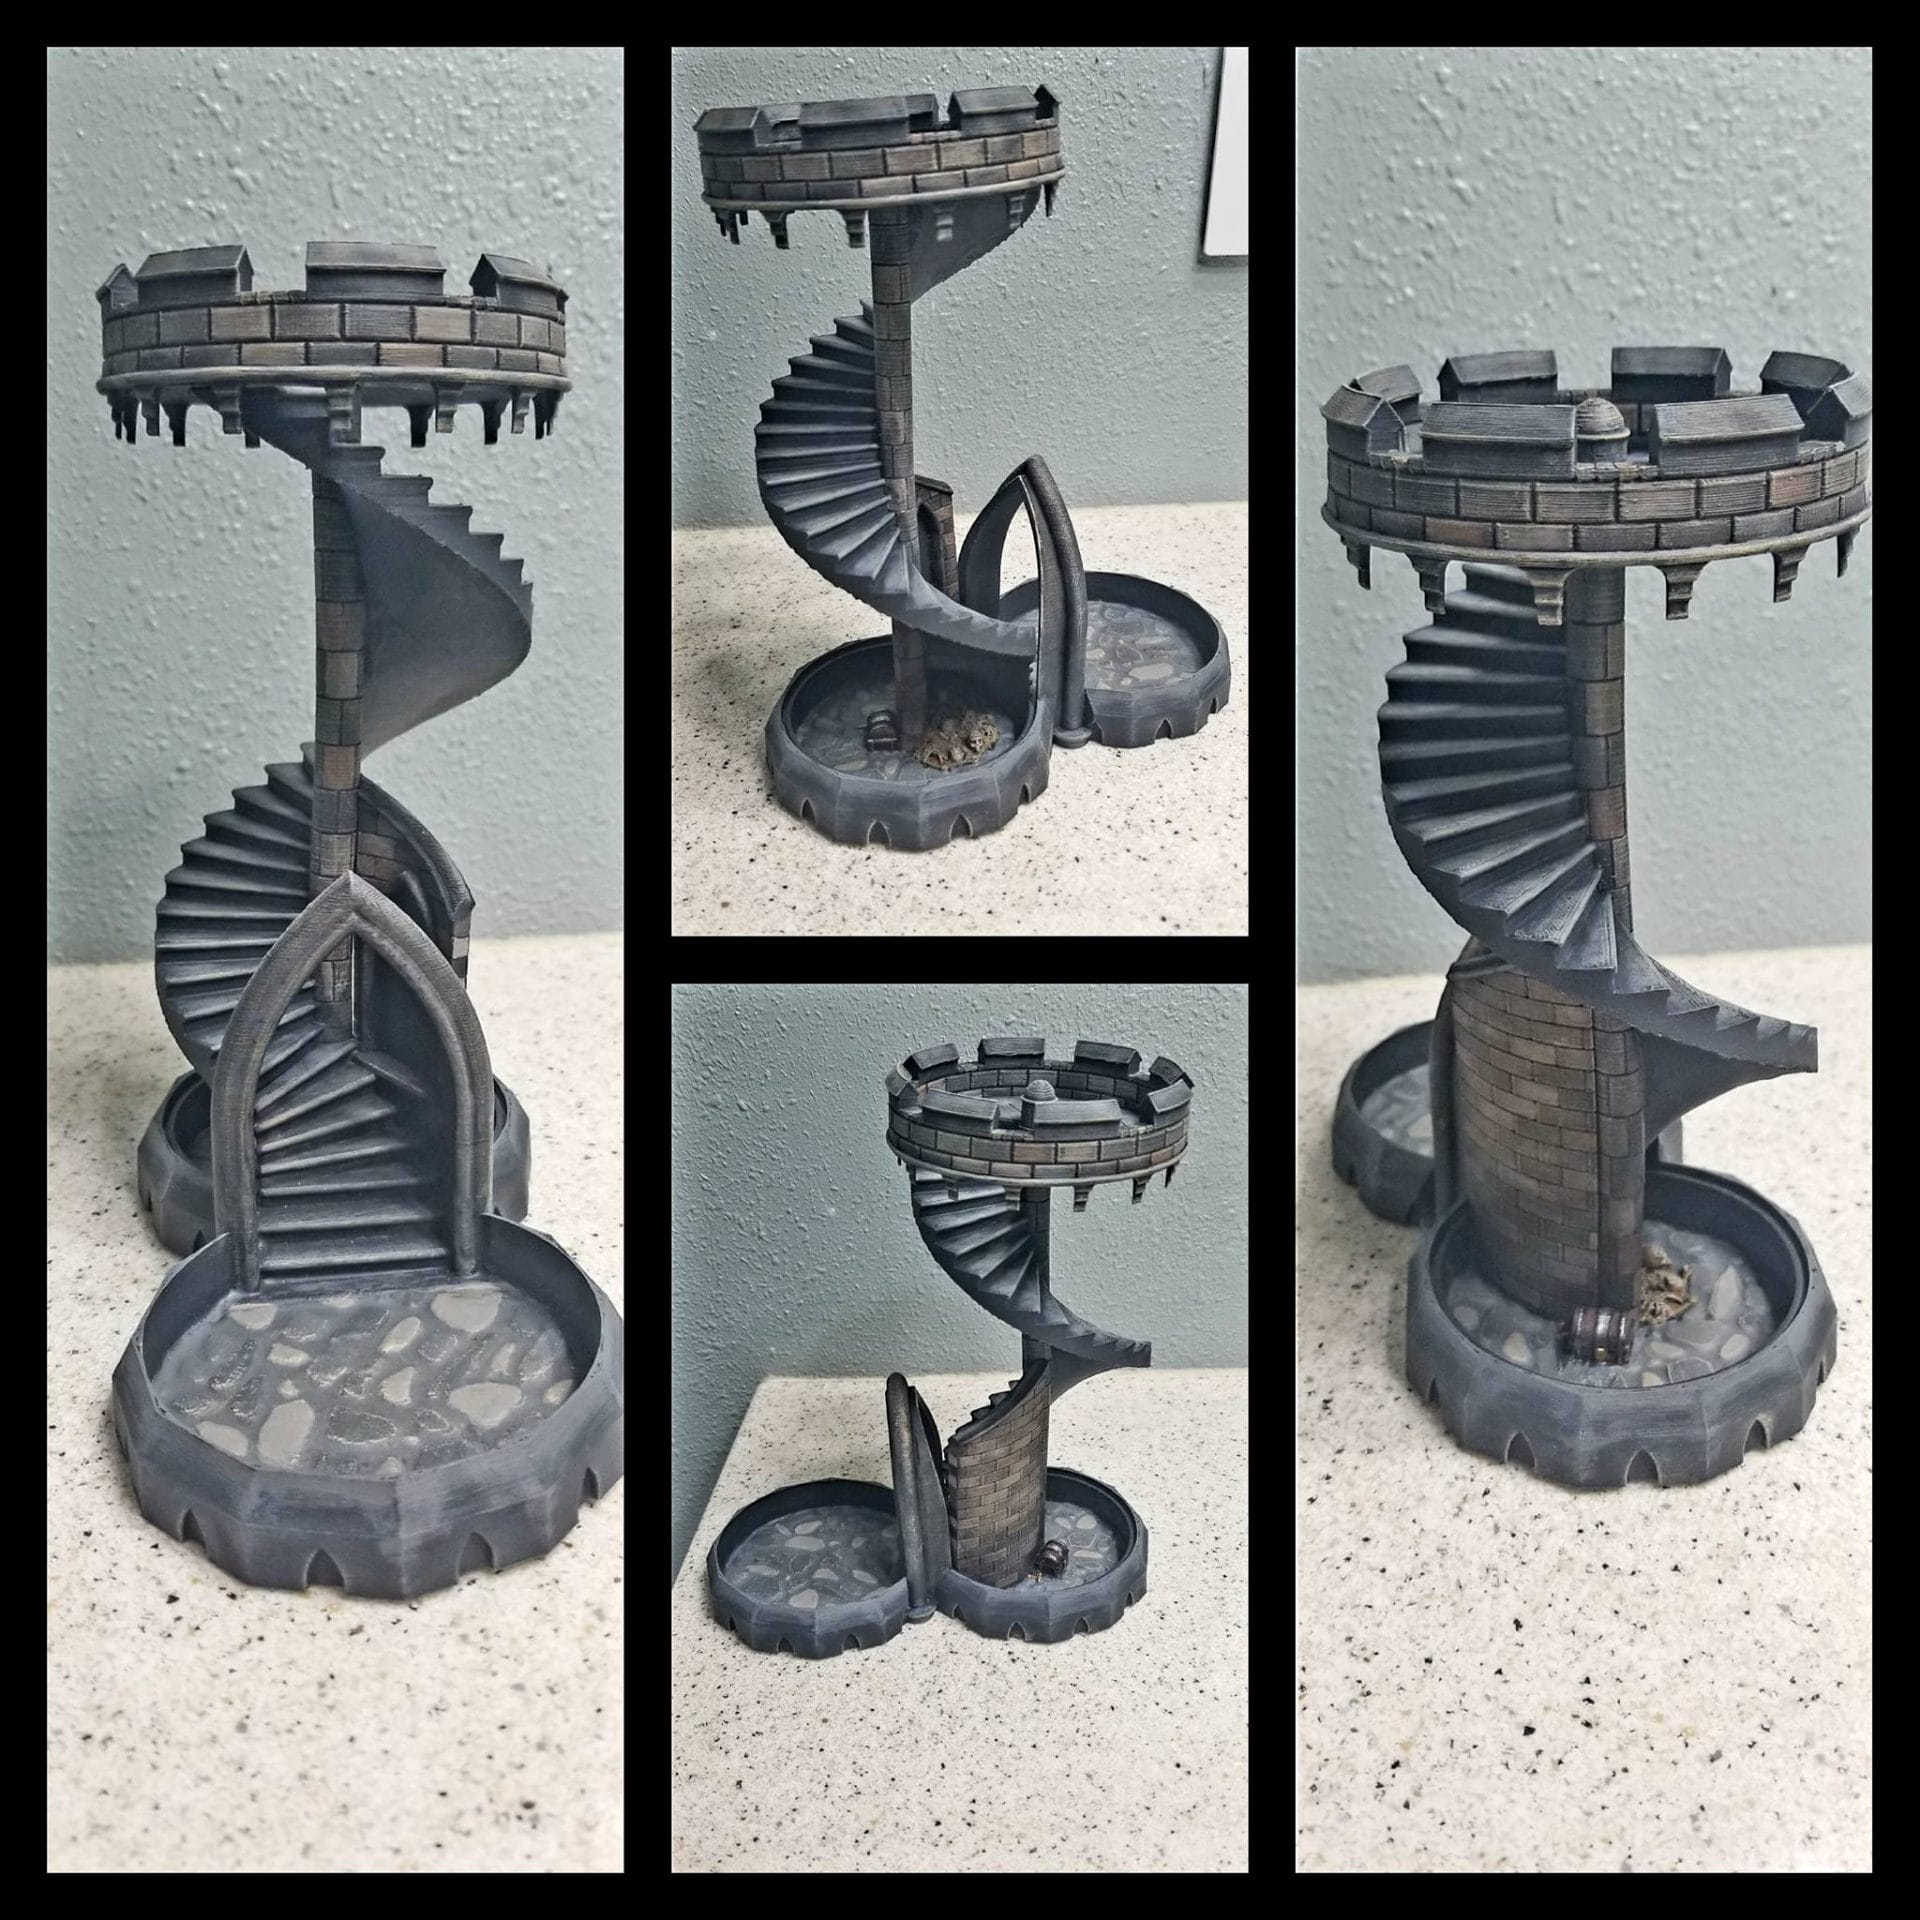 3D printed and painted dice tower is a thing of beauty